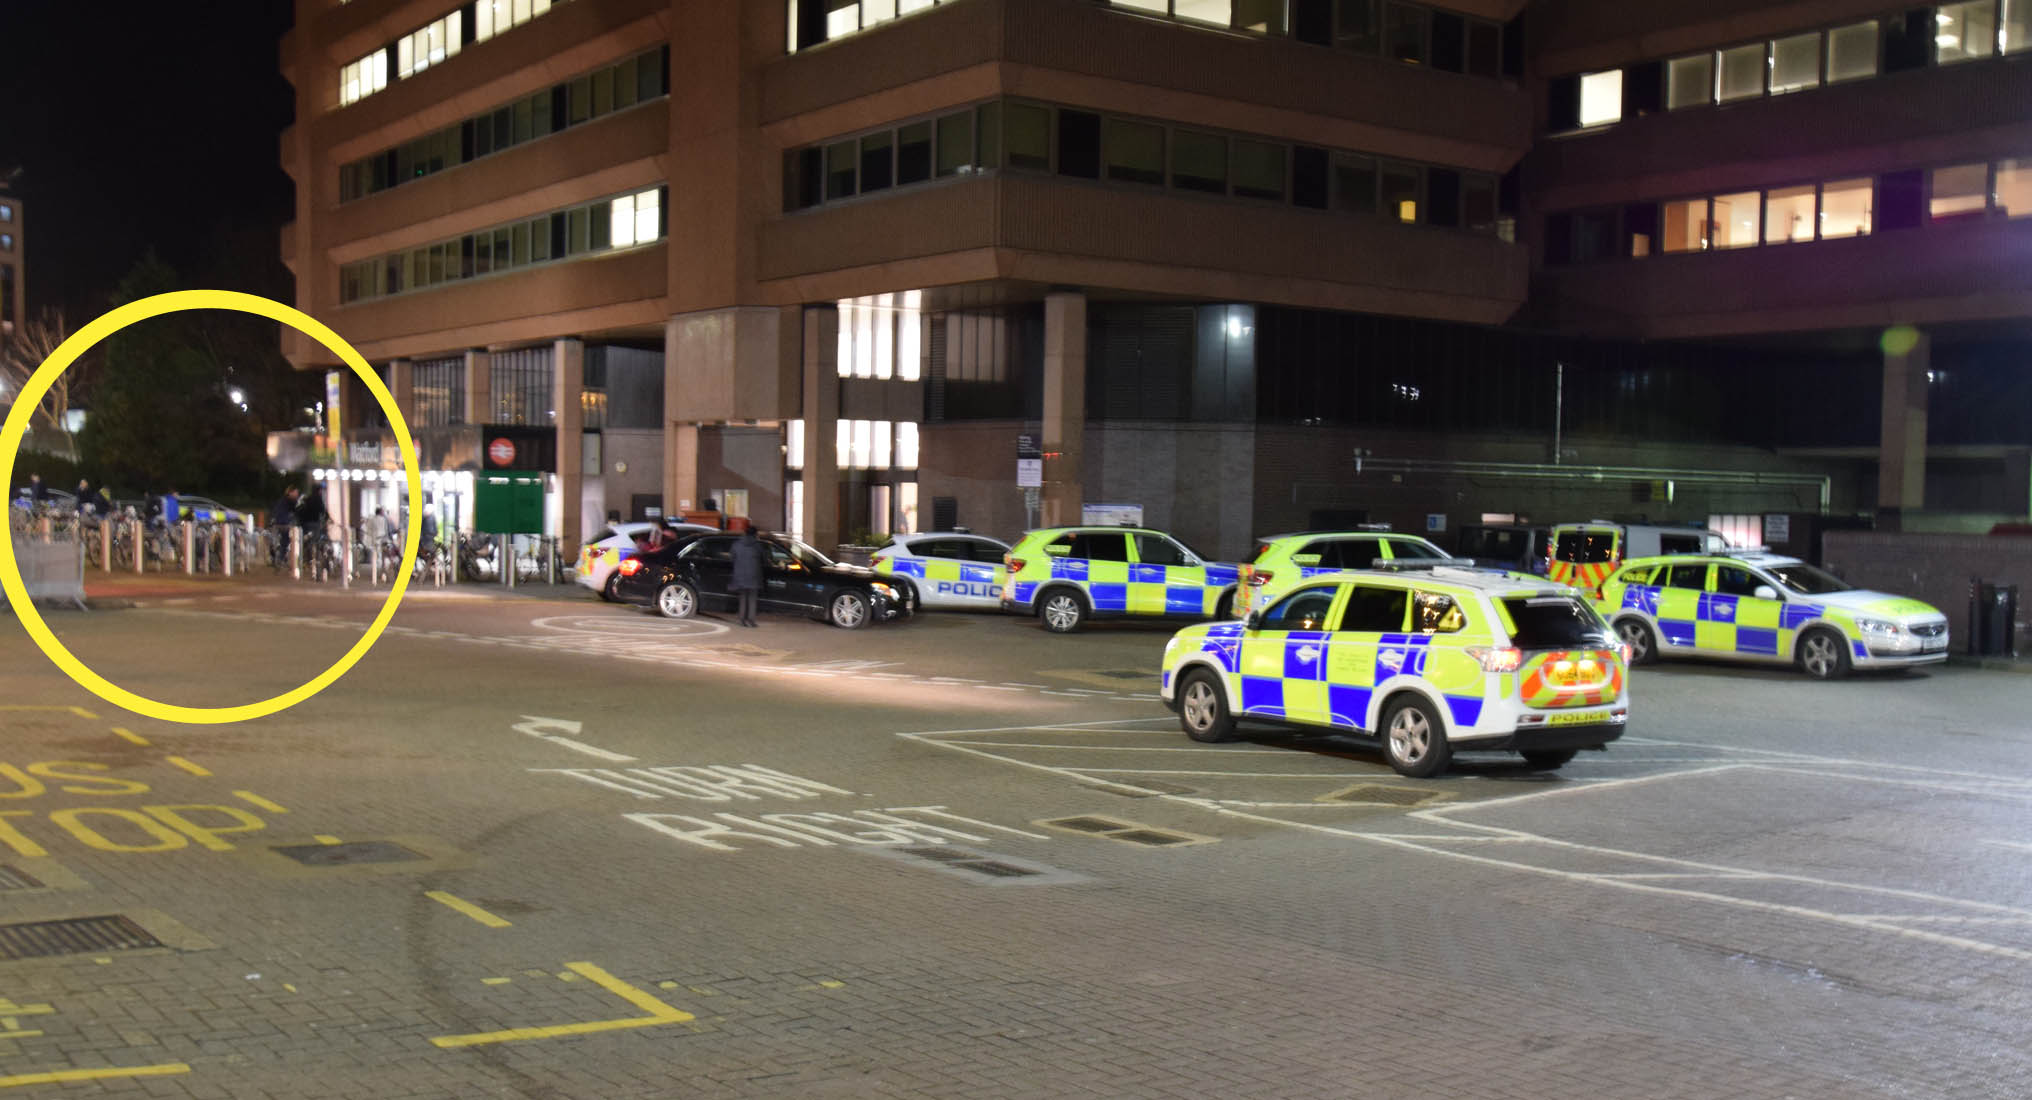 Armed Police Officers swoop Watford junction Train Station for Suspect